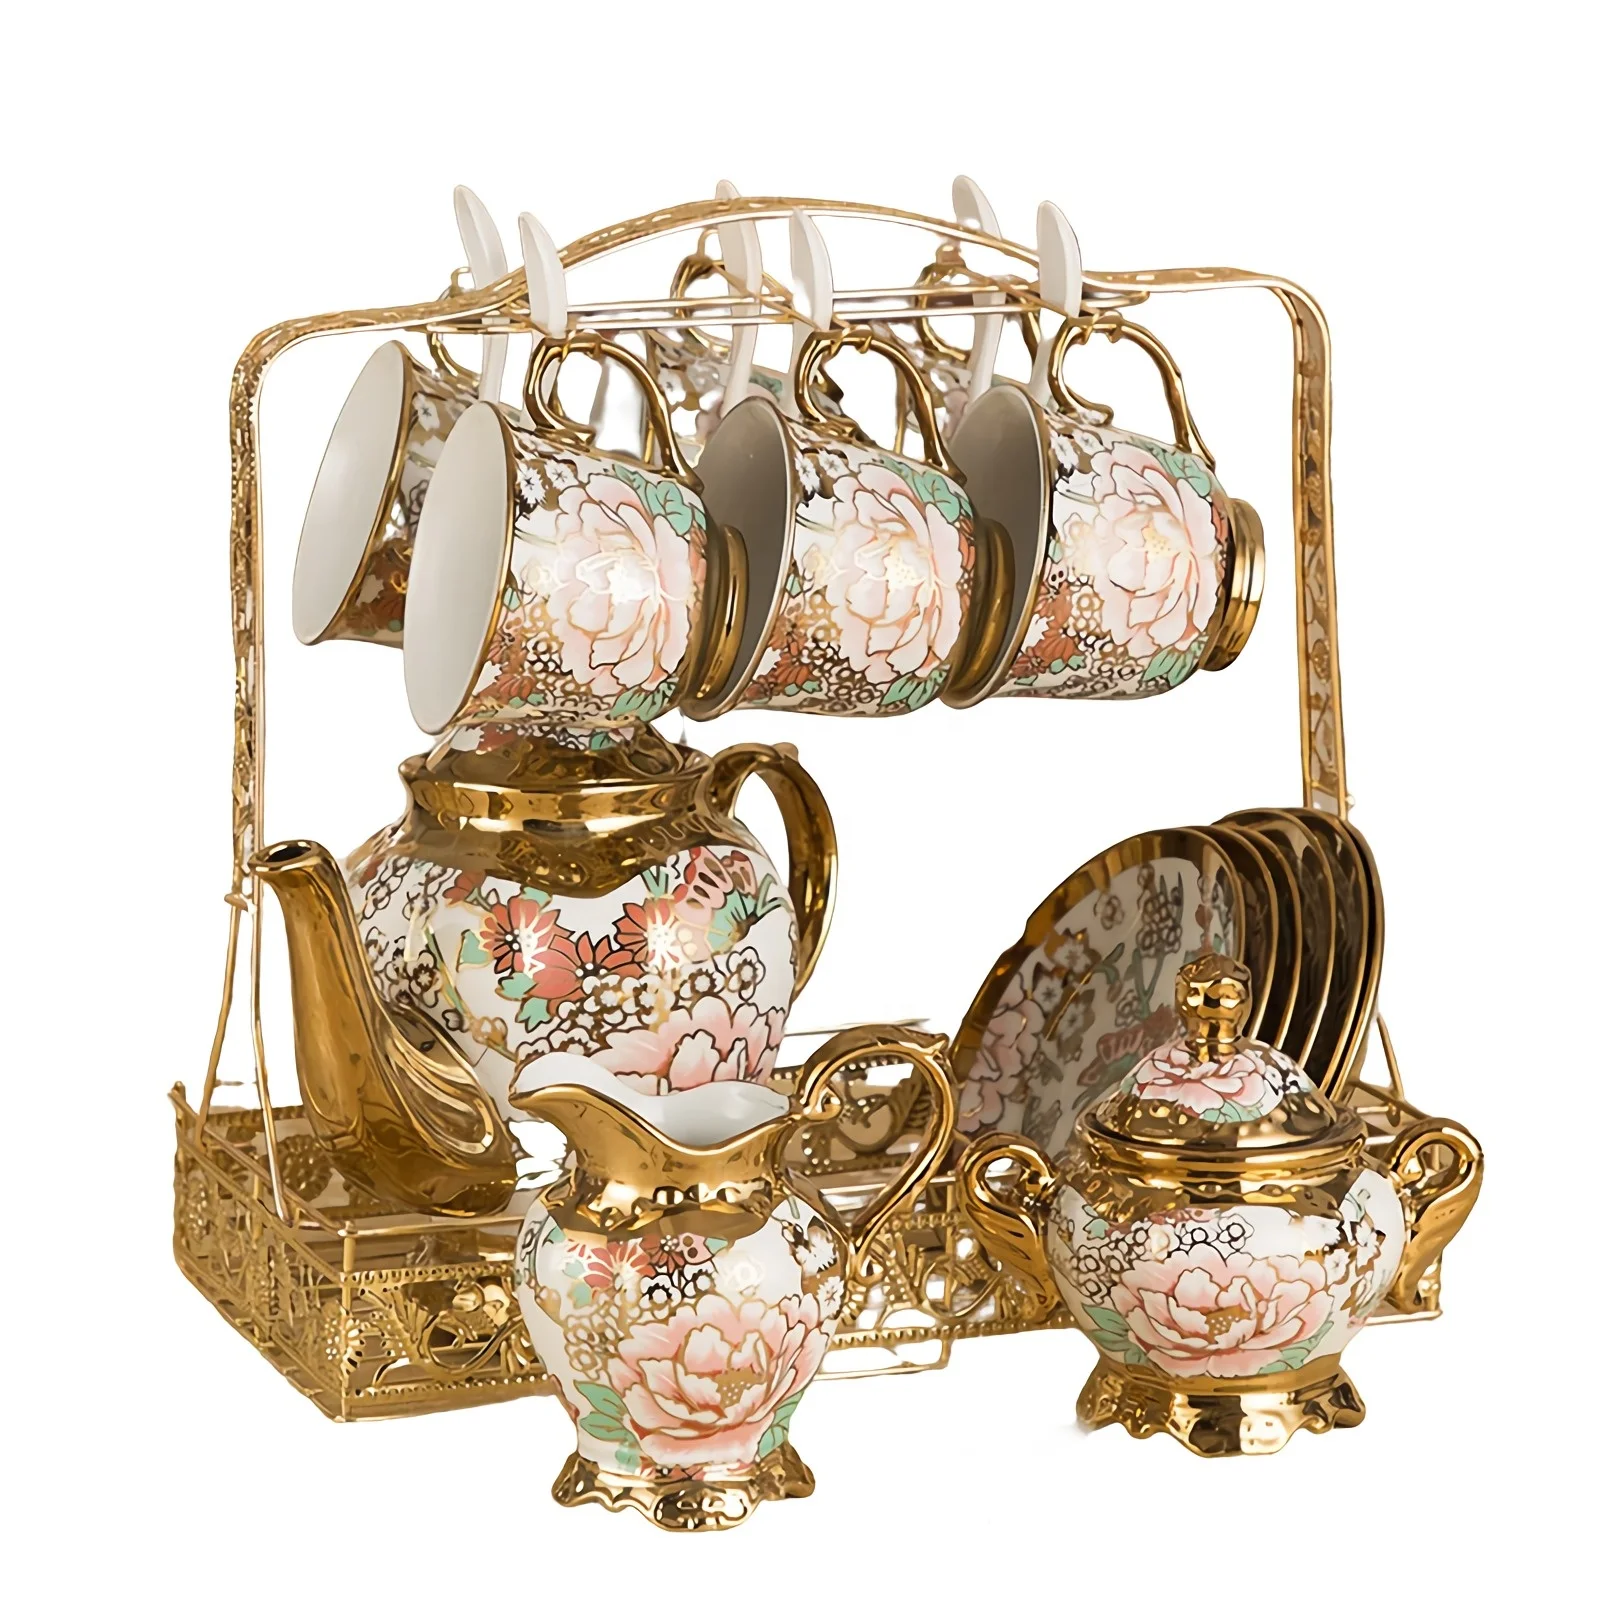 

Luxurious China Porcelain Coffee Tea Set with Cups Saucers Spoons Pot Milk Jug and Sugar Bowl for Home Wedding Afternoon Party